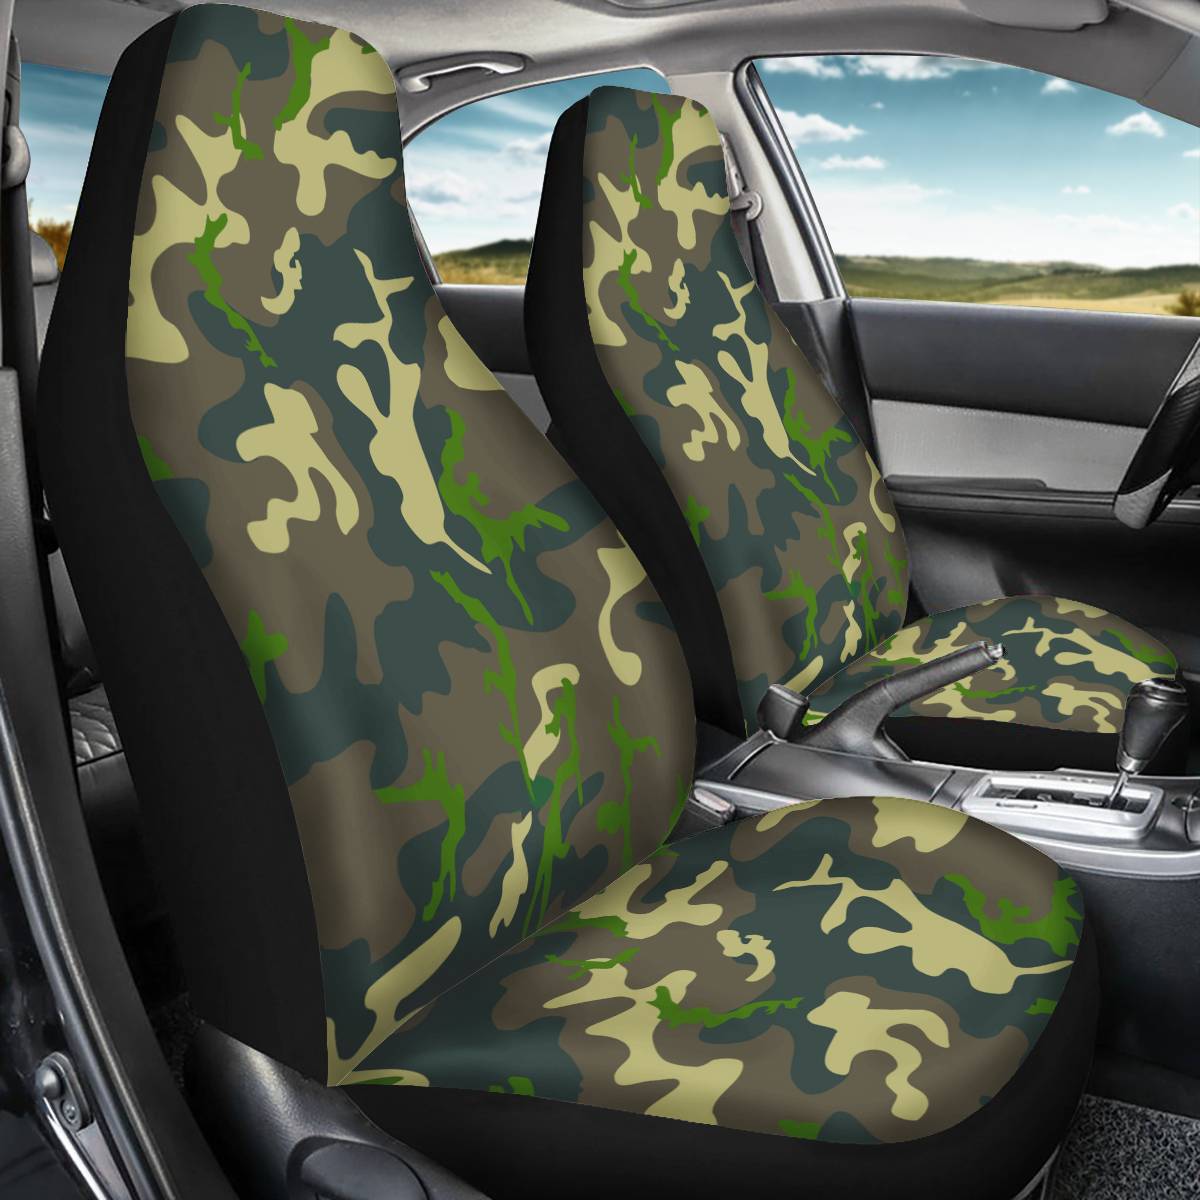 2 Pieces Wearproof Dirt-proof Easy to Clean Front Single Car Seat Covers Plant Landscape Summer Cooling Four Seasons Car Seat Covers for Front Two Seats Comes with 2 Pieces - Honeycomb Cloth